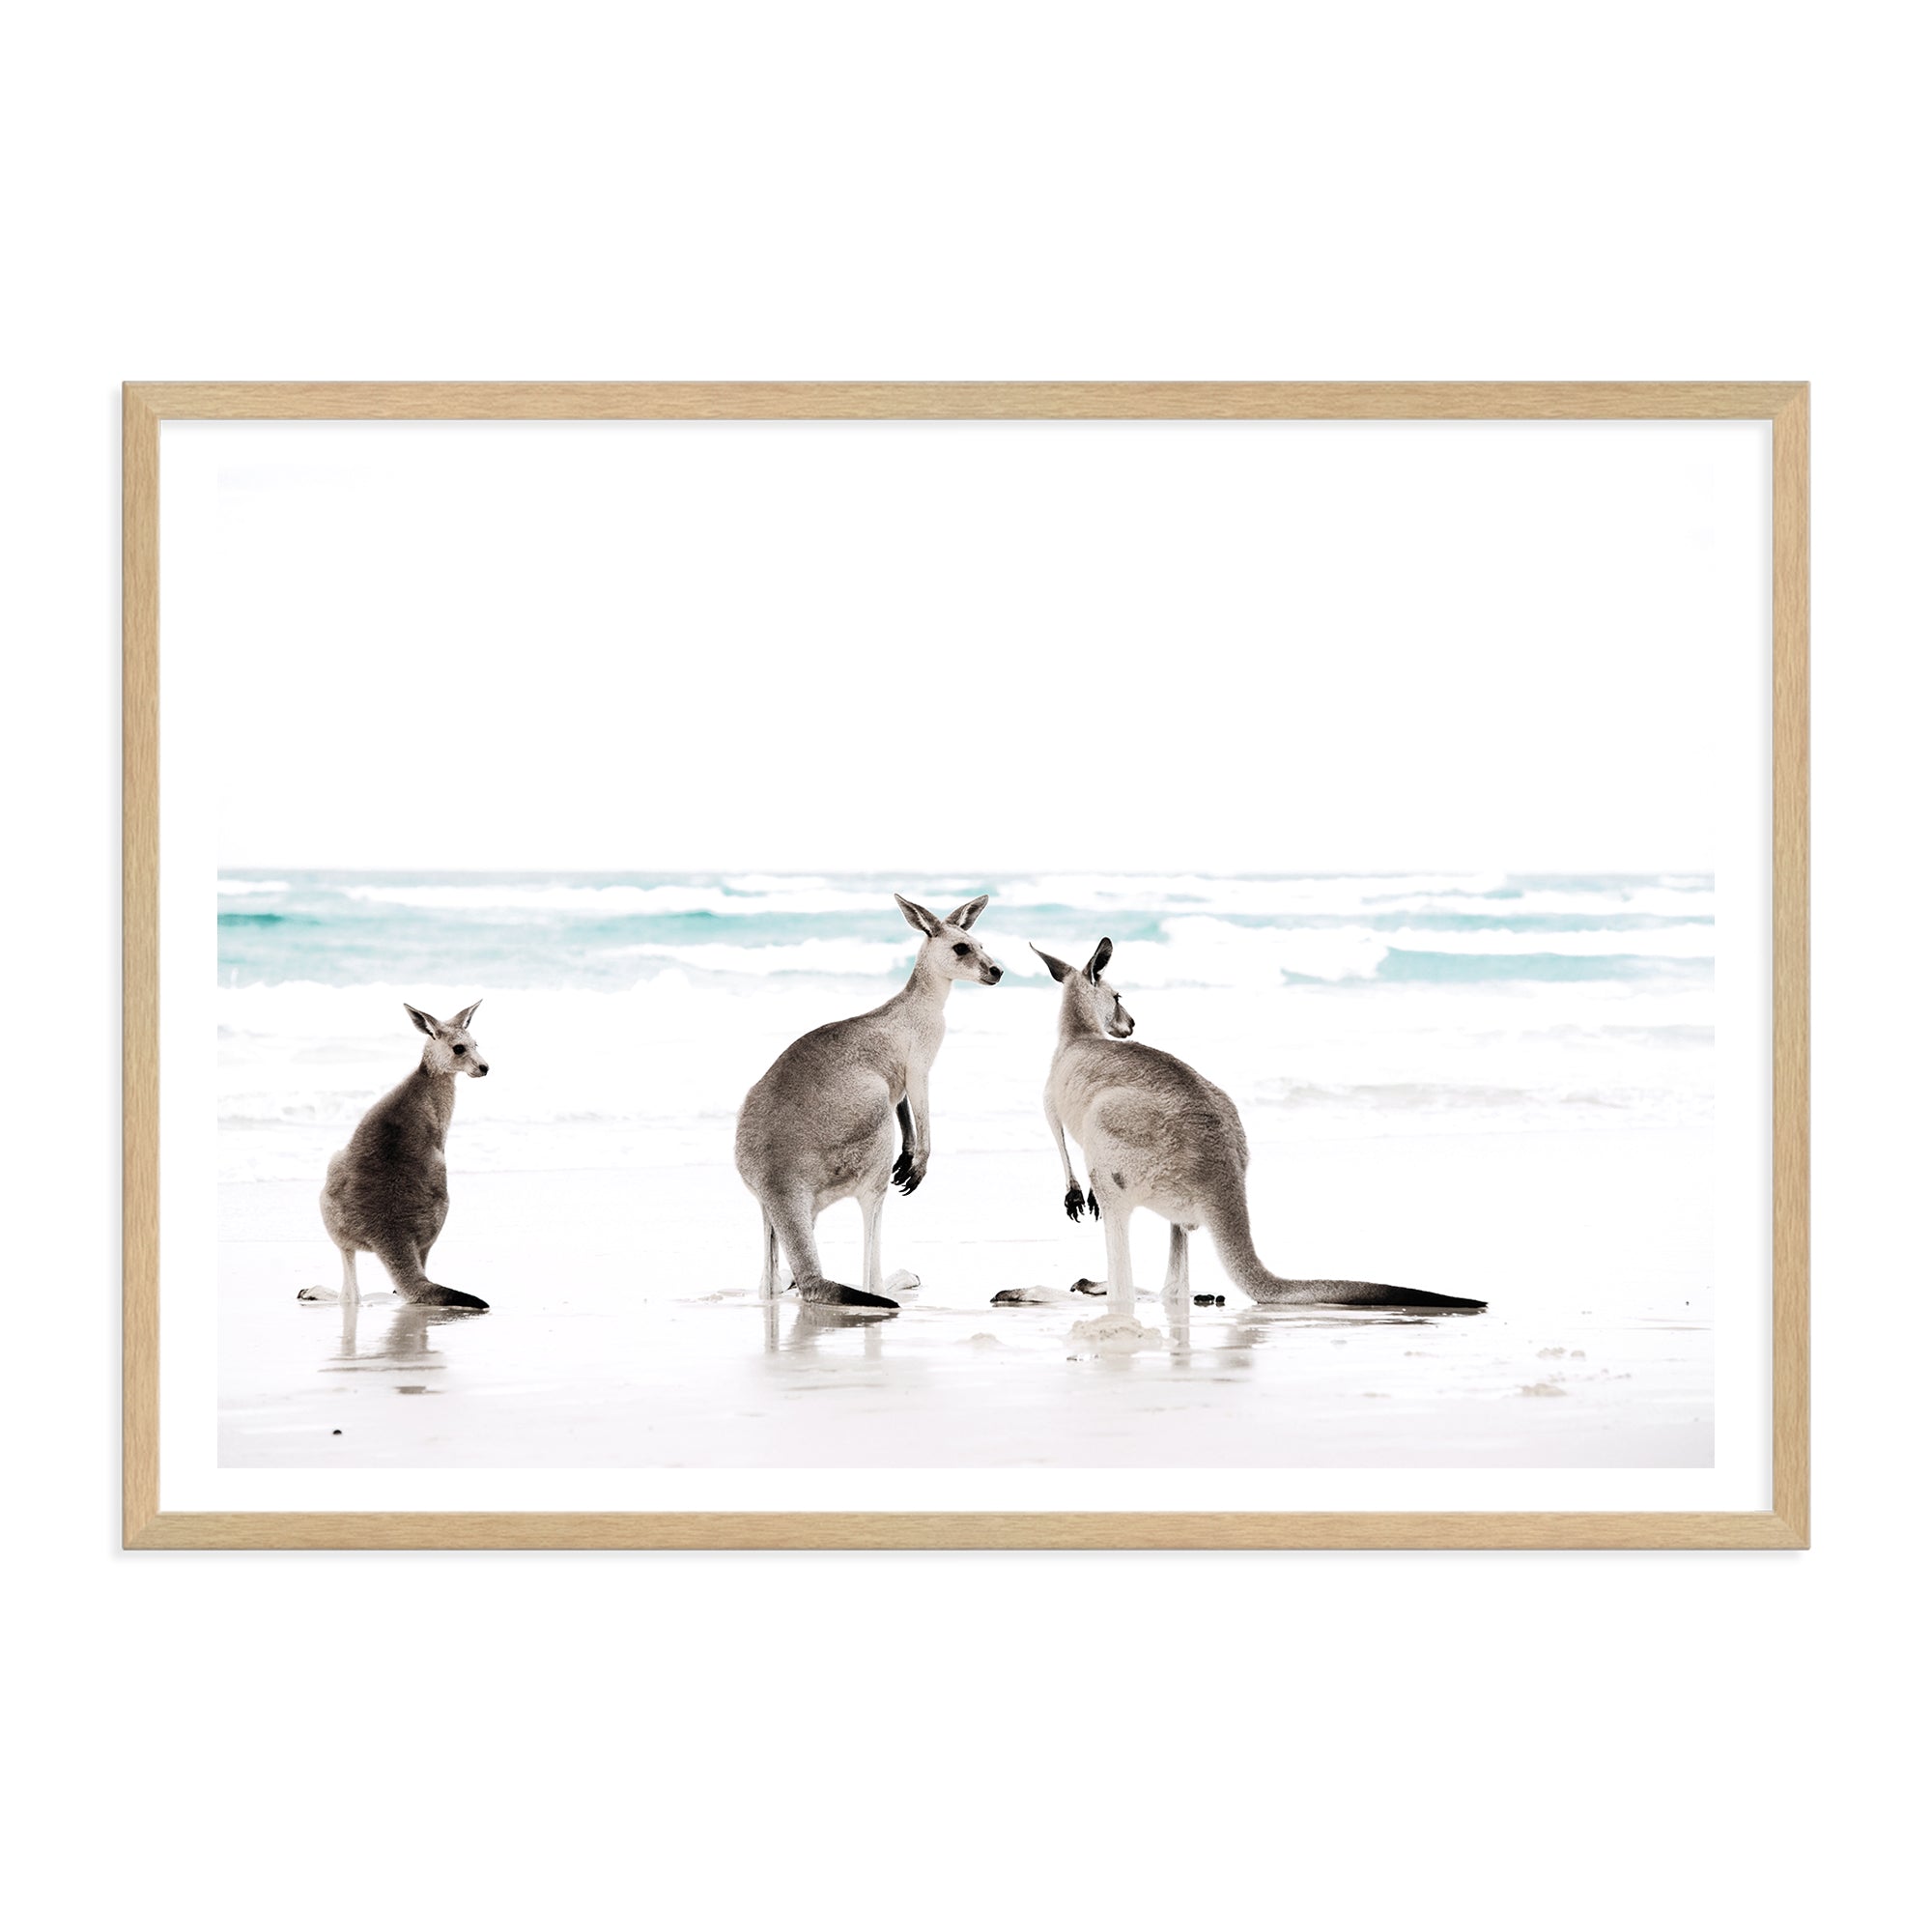 A coastal artwork of three kangaroos enjoying some time on the beach, available in natural timber, black or white frames.